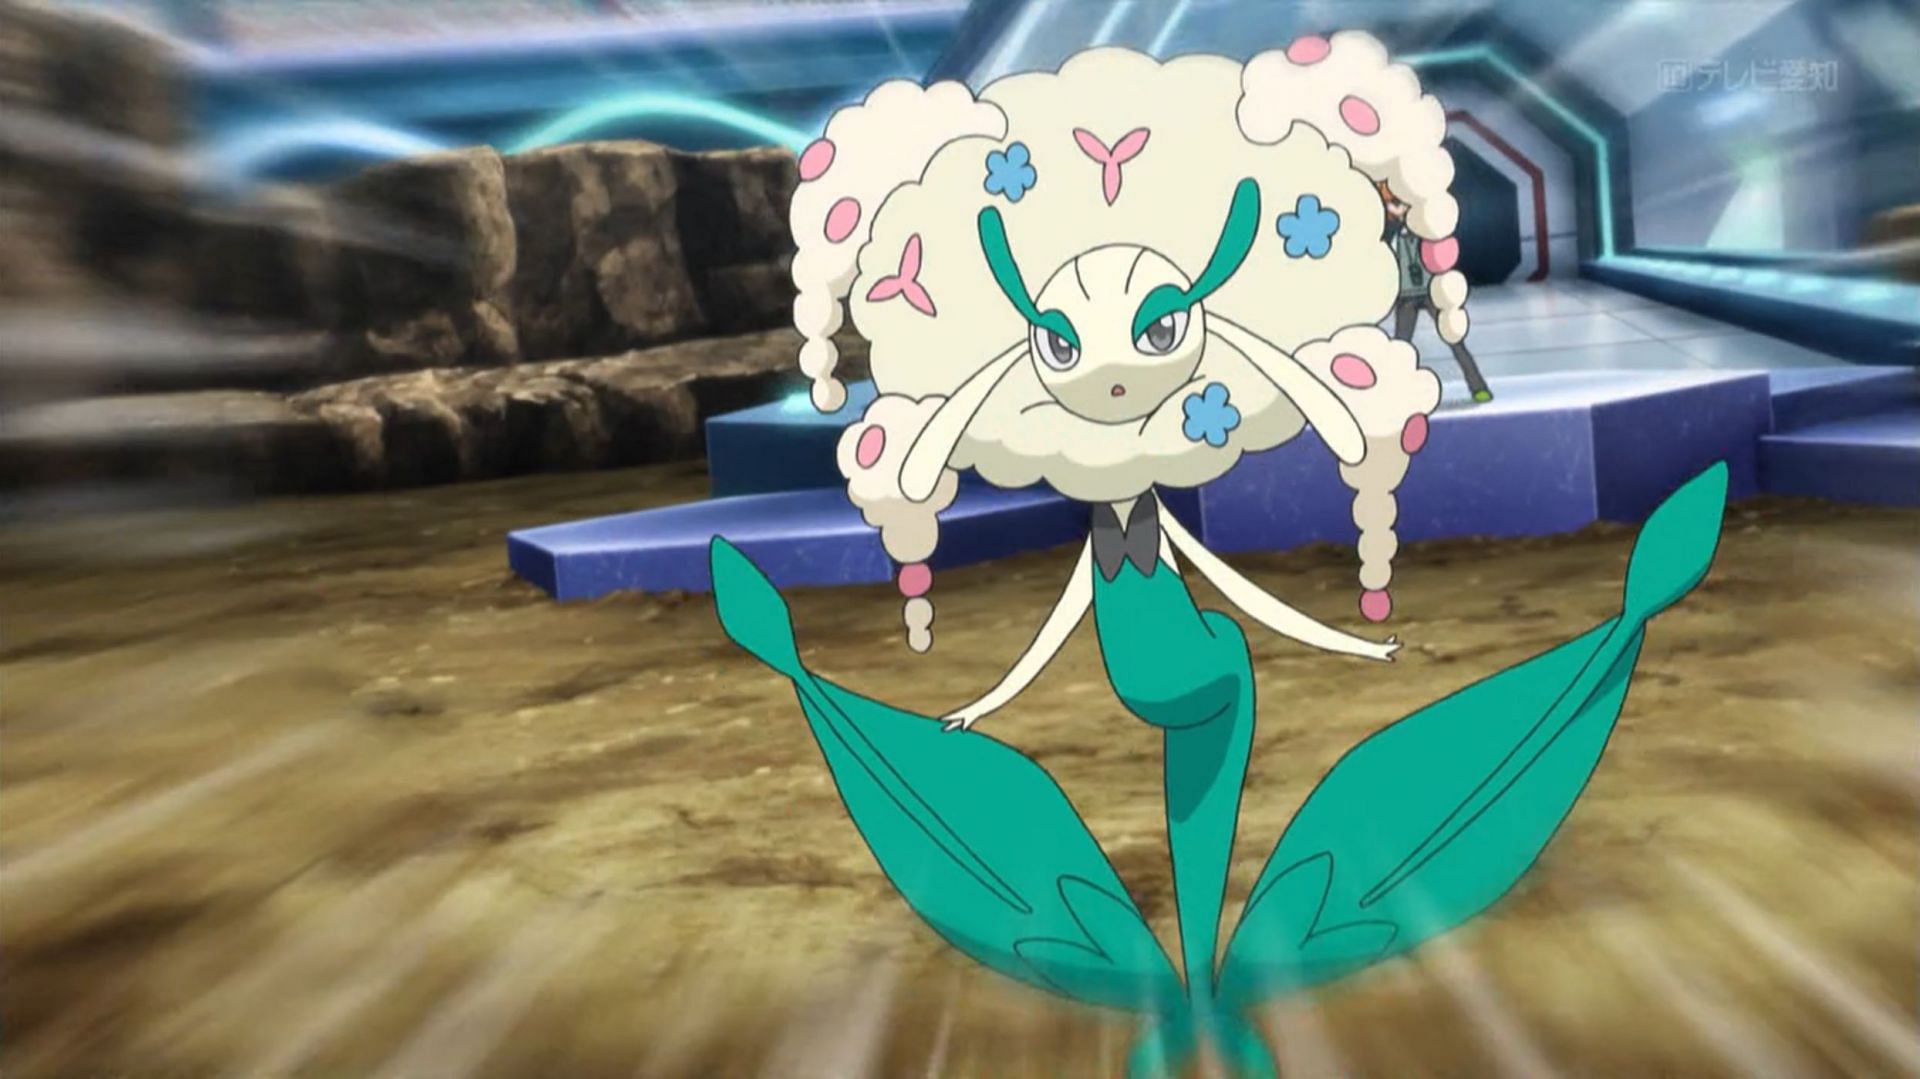 Florges as it appears in the Pokemon anime (Image via The Pokemon Company)